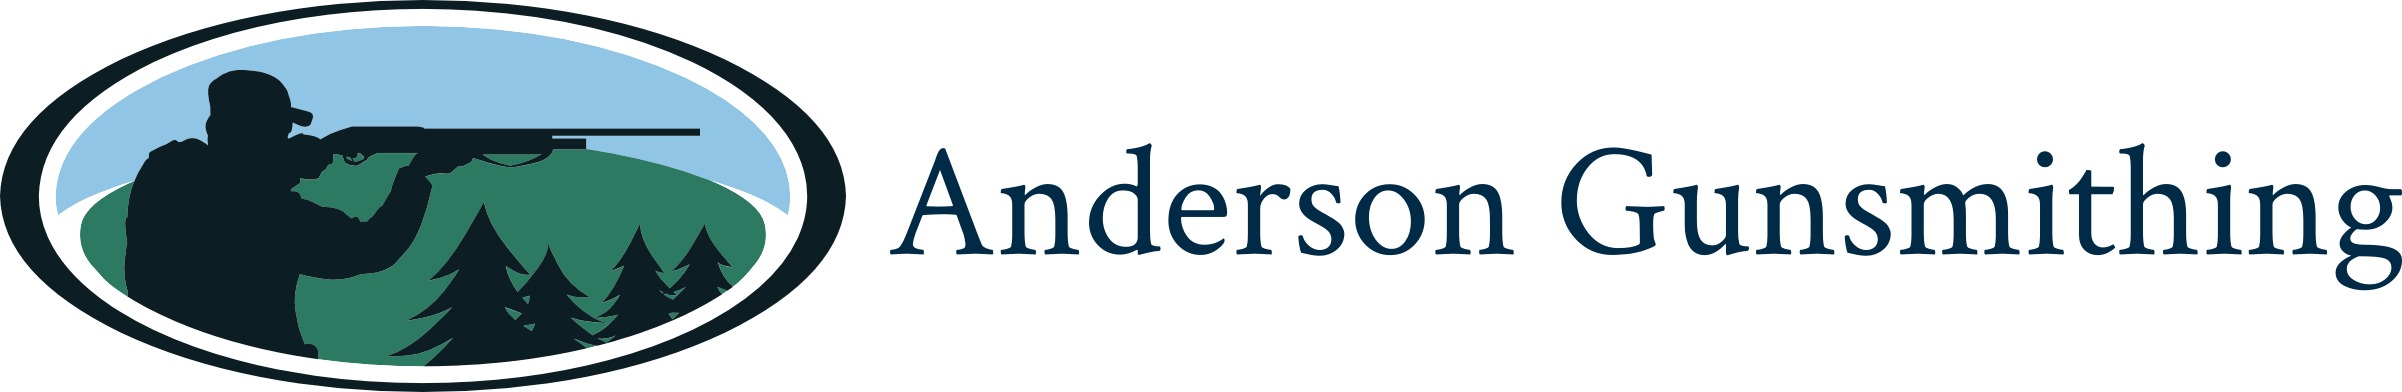 Anderson Gunsmithing and Firearms Dealer